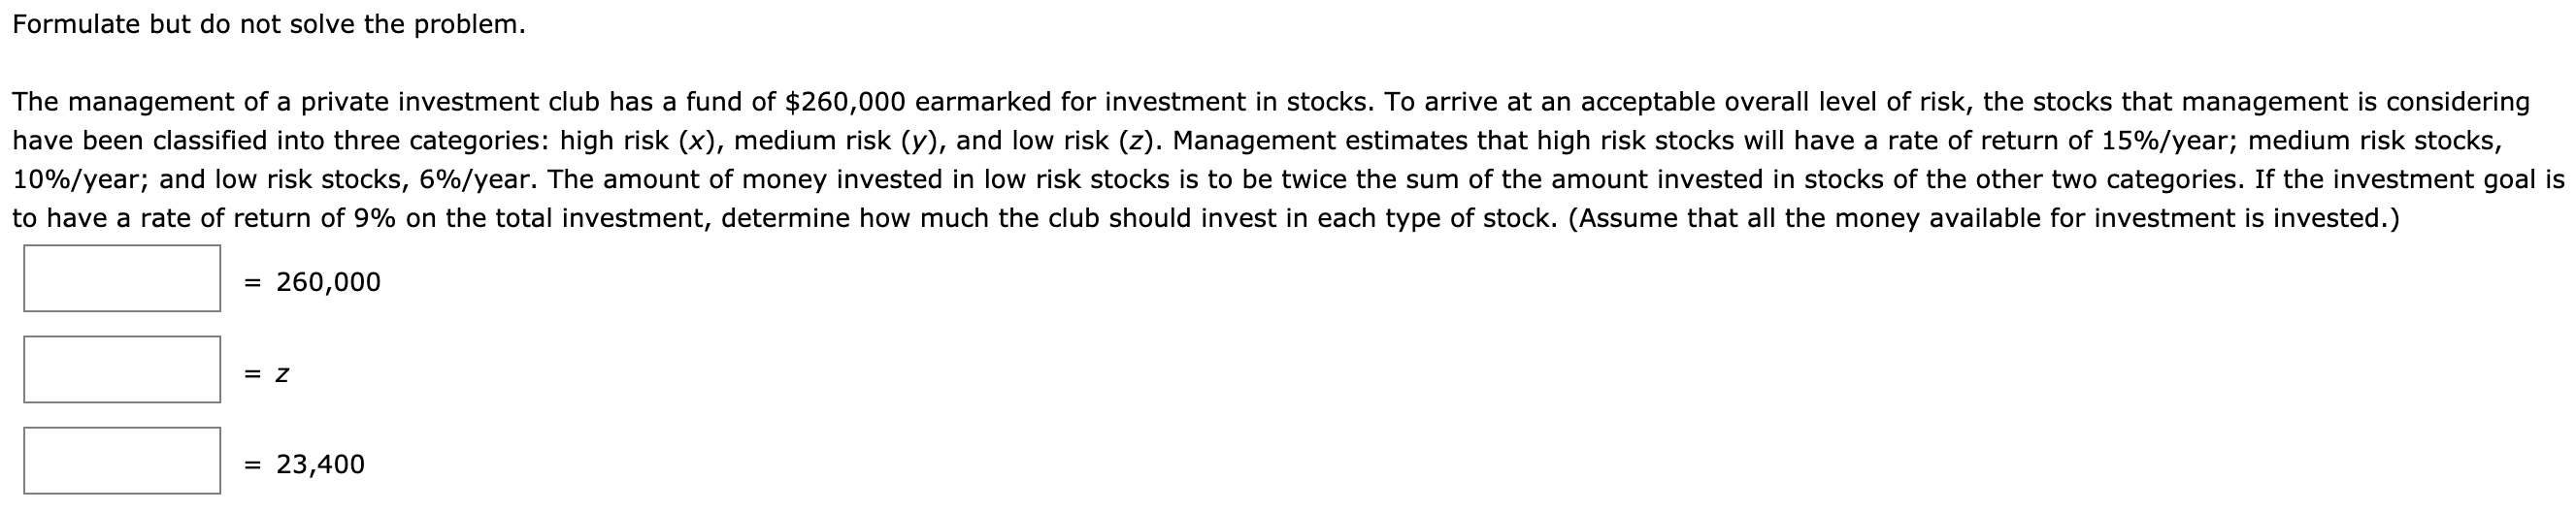 Formulate but do not solve the problem.
The management of a private investment club has a fund of $260,000 earmarked for investment in stocks. To arrive at an acceptable overall level of risk, the stocks that management is considering
have been classified into three categories: high risk (x), medium risk (y), and low risk (z). Management estimates that high risk stocks will have a rate of return of 15%/year; medium risk stocks,
10%/year; and low risk stocks, 6%/year. The amount of money invested in low risk stocks is to be twice the sum of the amount invested in stocks of the other two categories. If the investment goal is
to have a rate of return of 9% on the total investment, determine how much the club should invest in each type of stock. (Assume that all the money available for investment is invested.)
= 260,000
= 23,400
